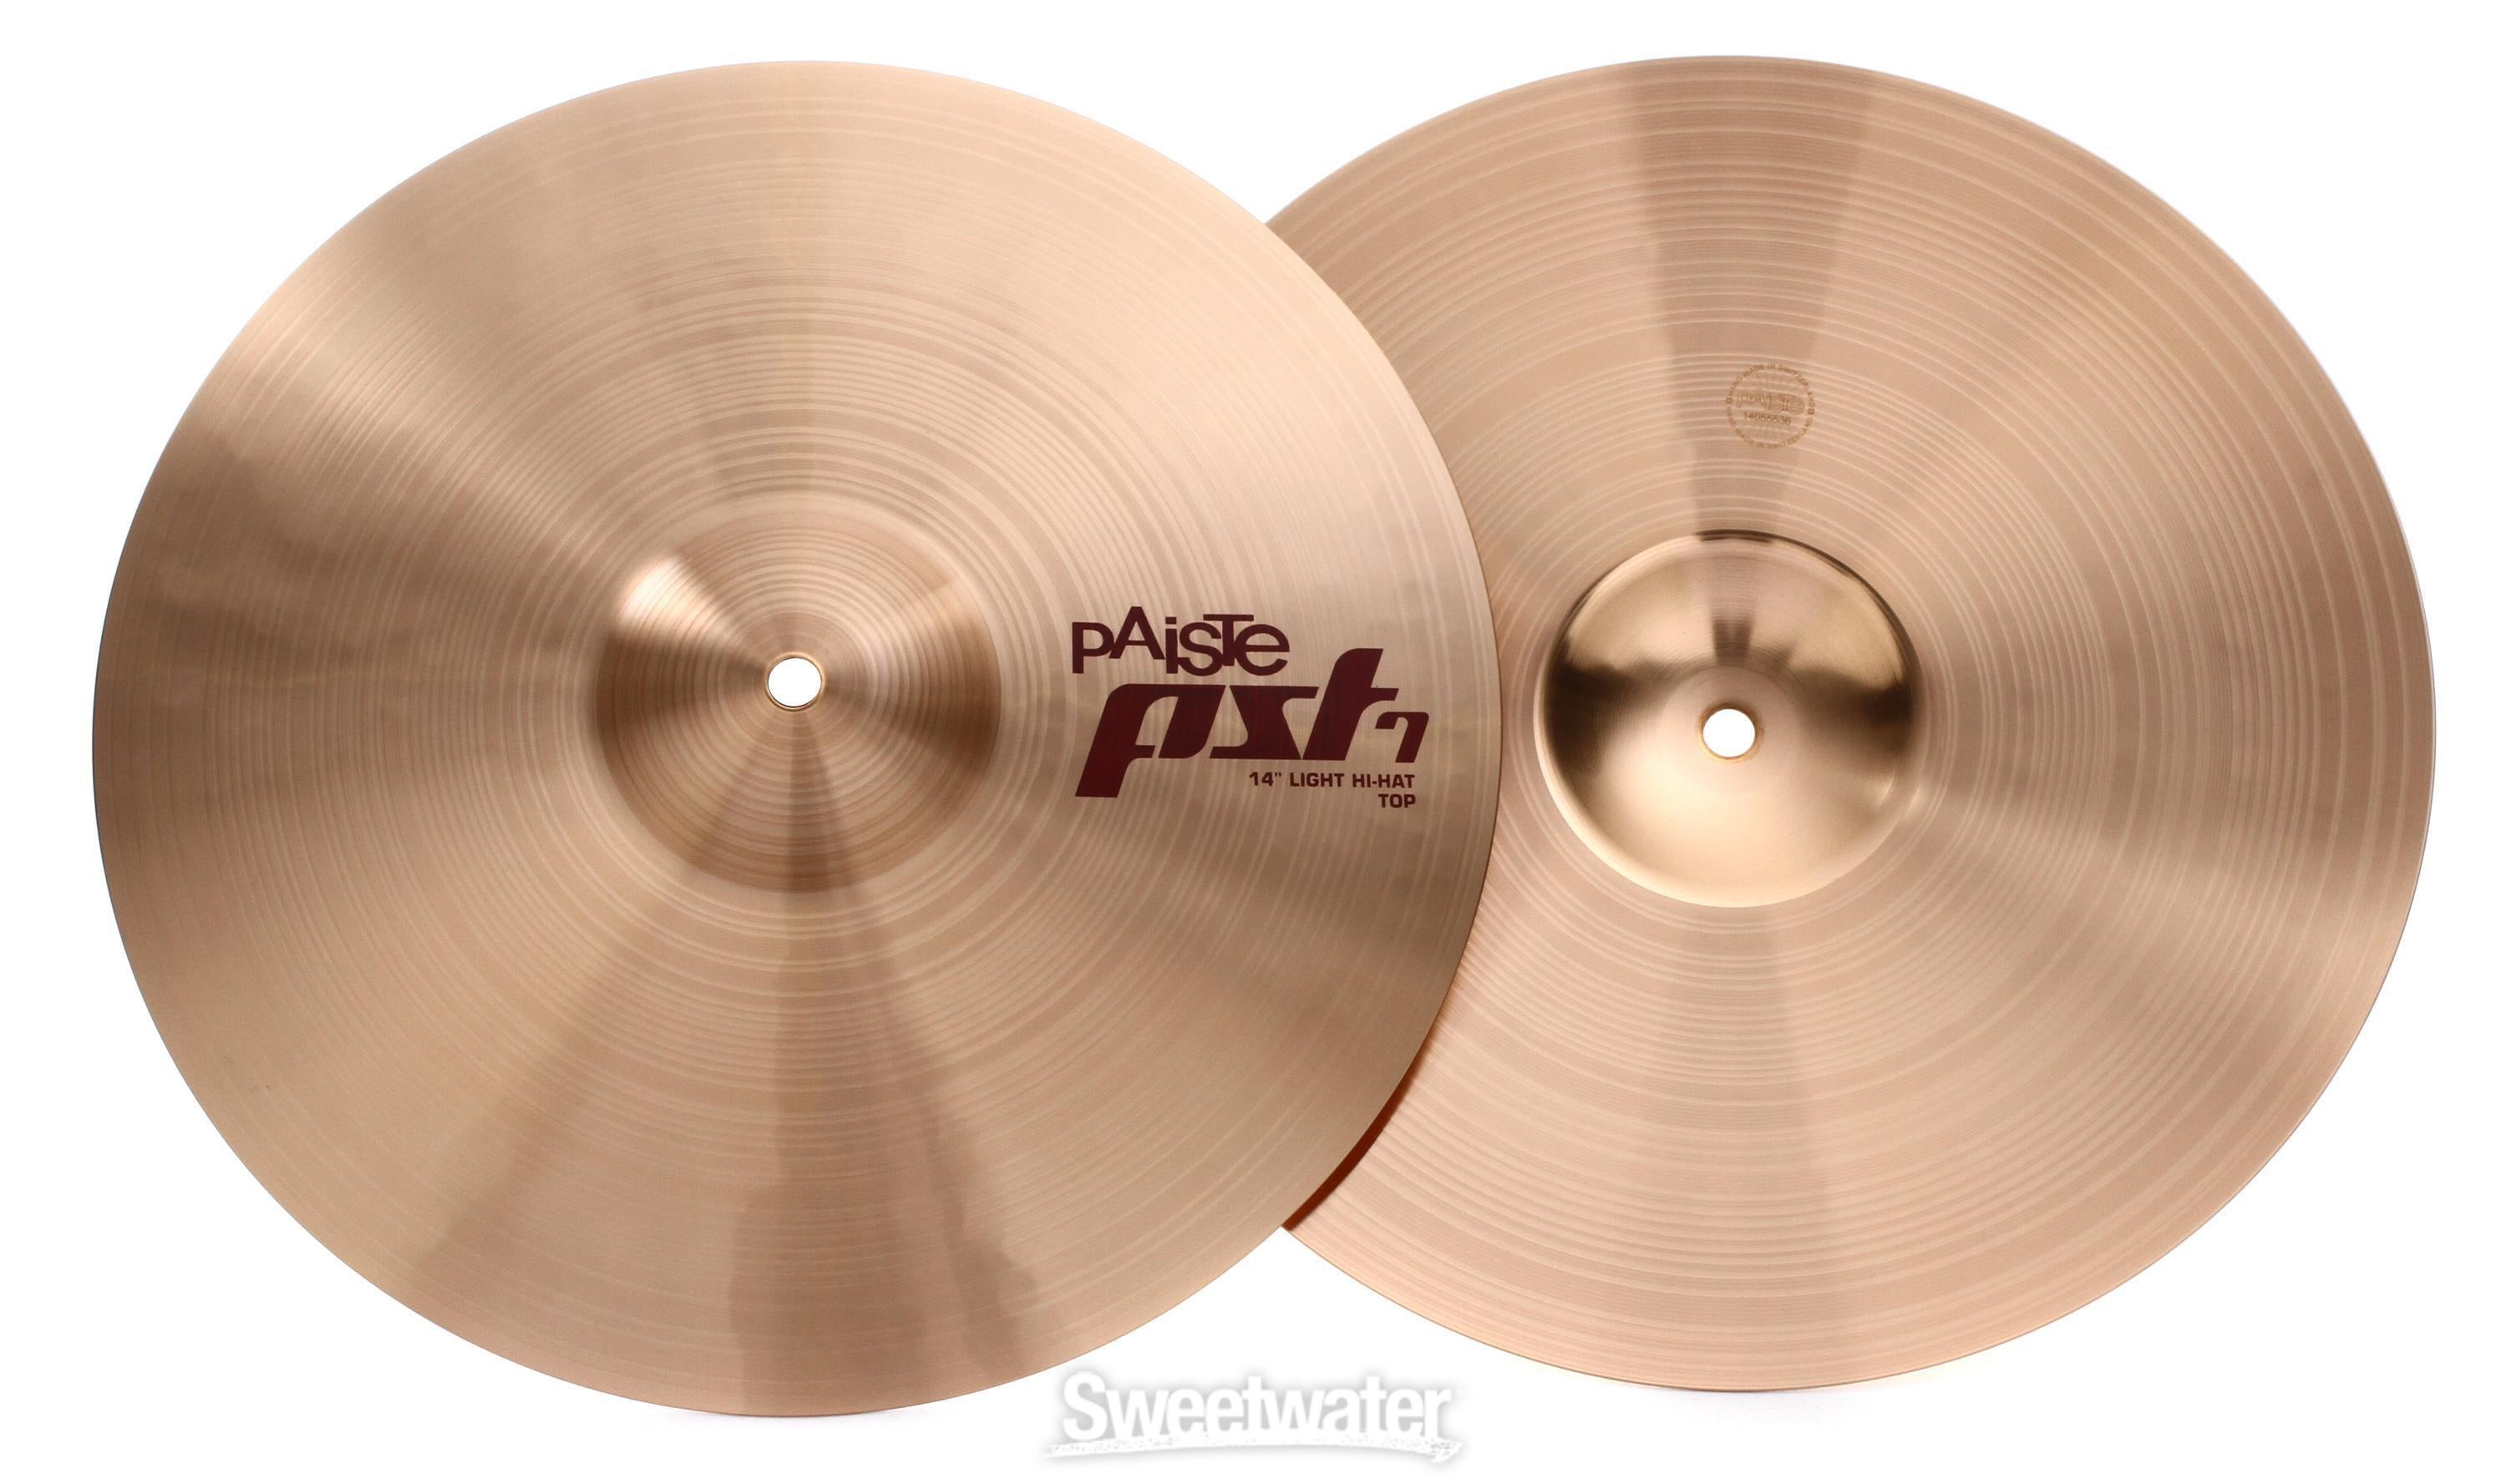 Paiste PST 7 Session Cymbal Set - 14/18/20 inch - with Free 16 